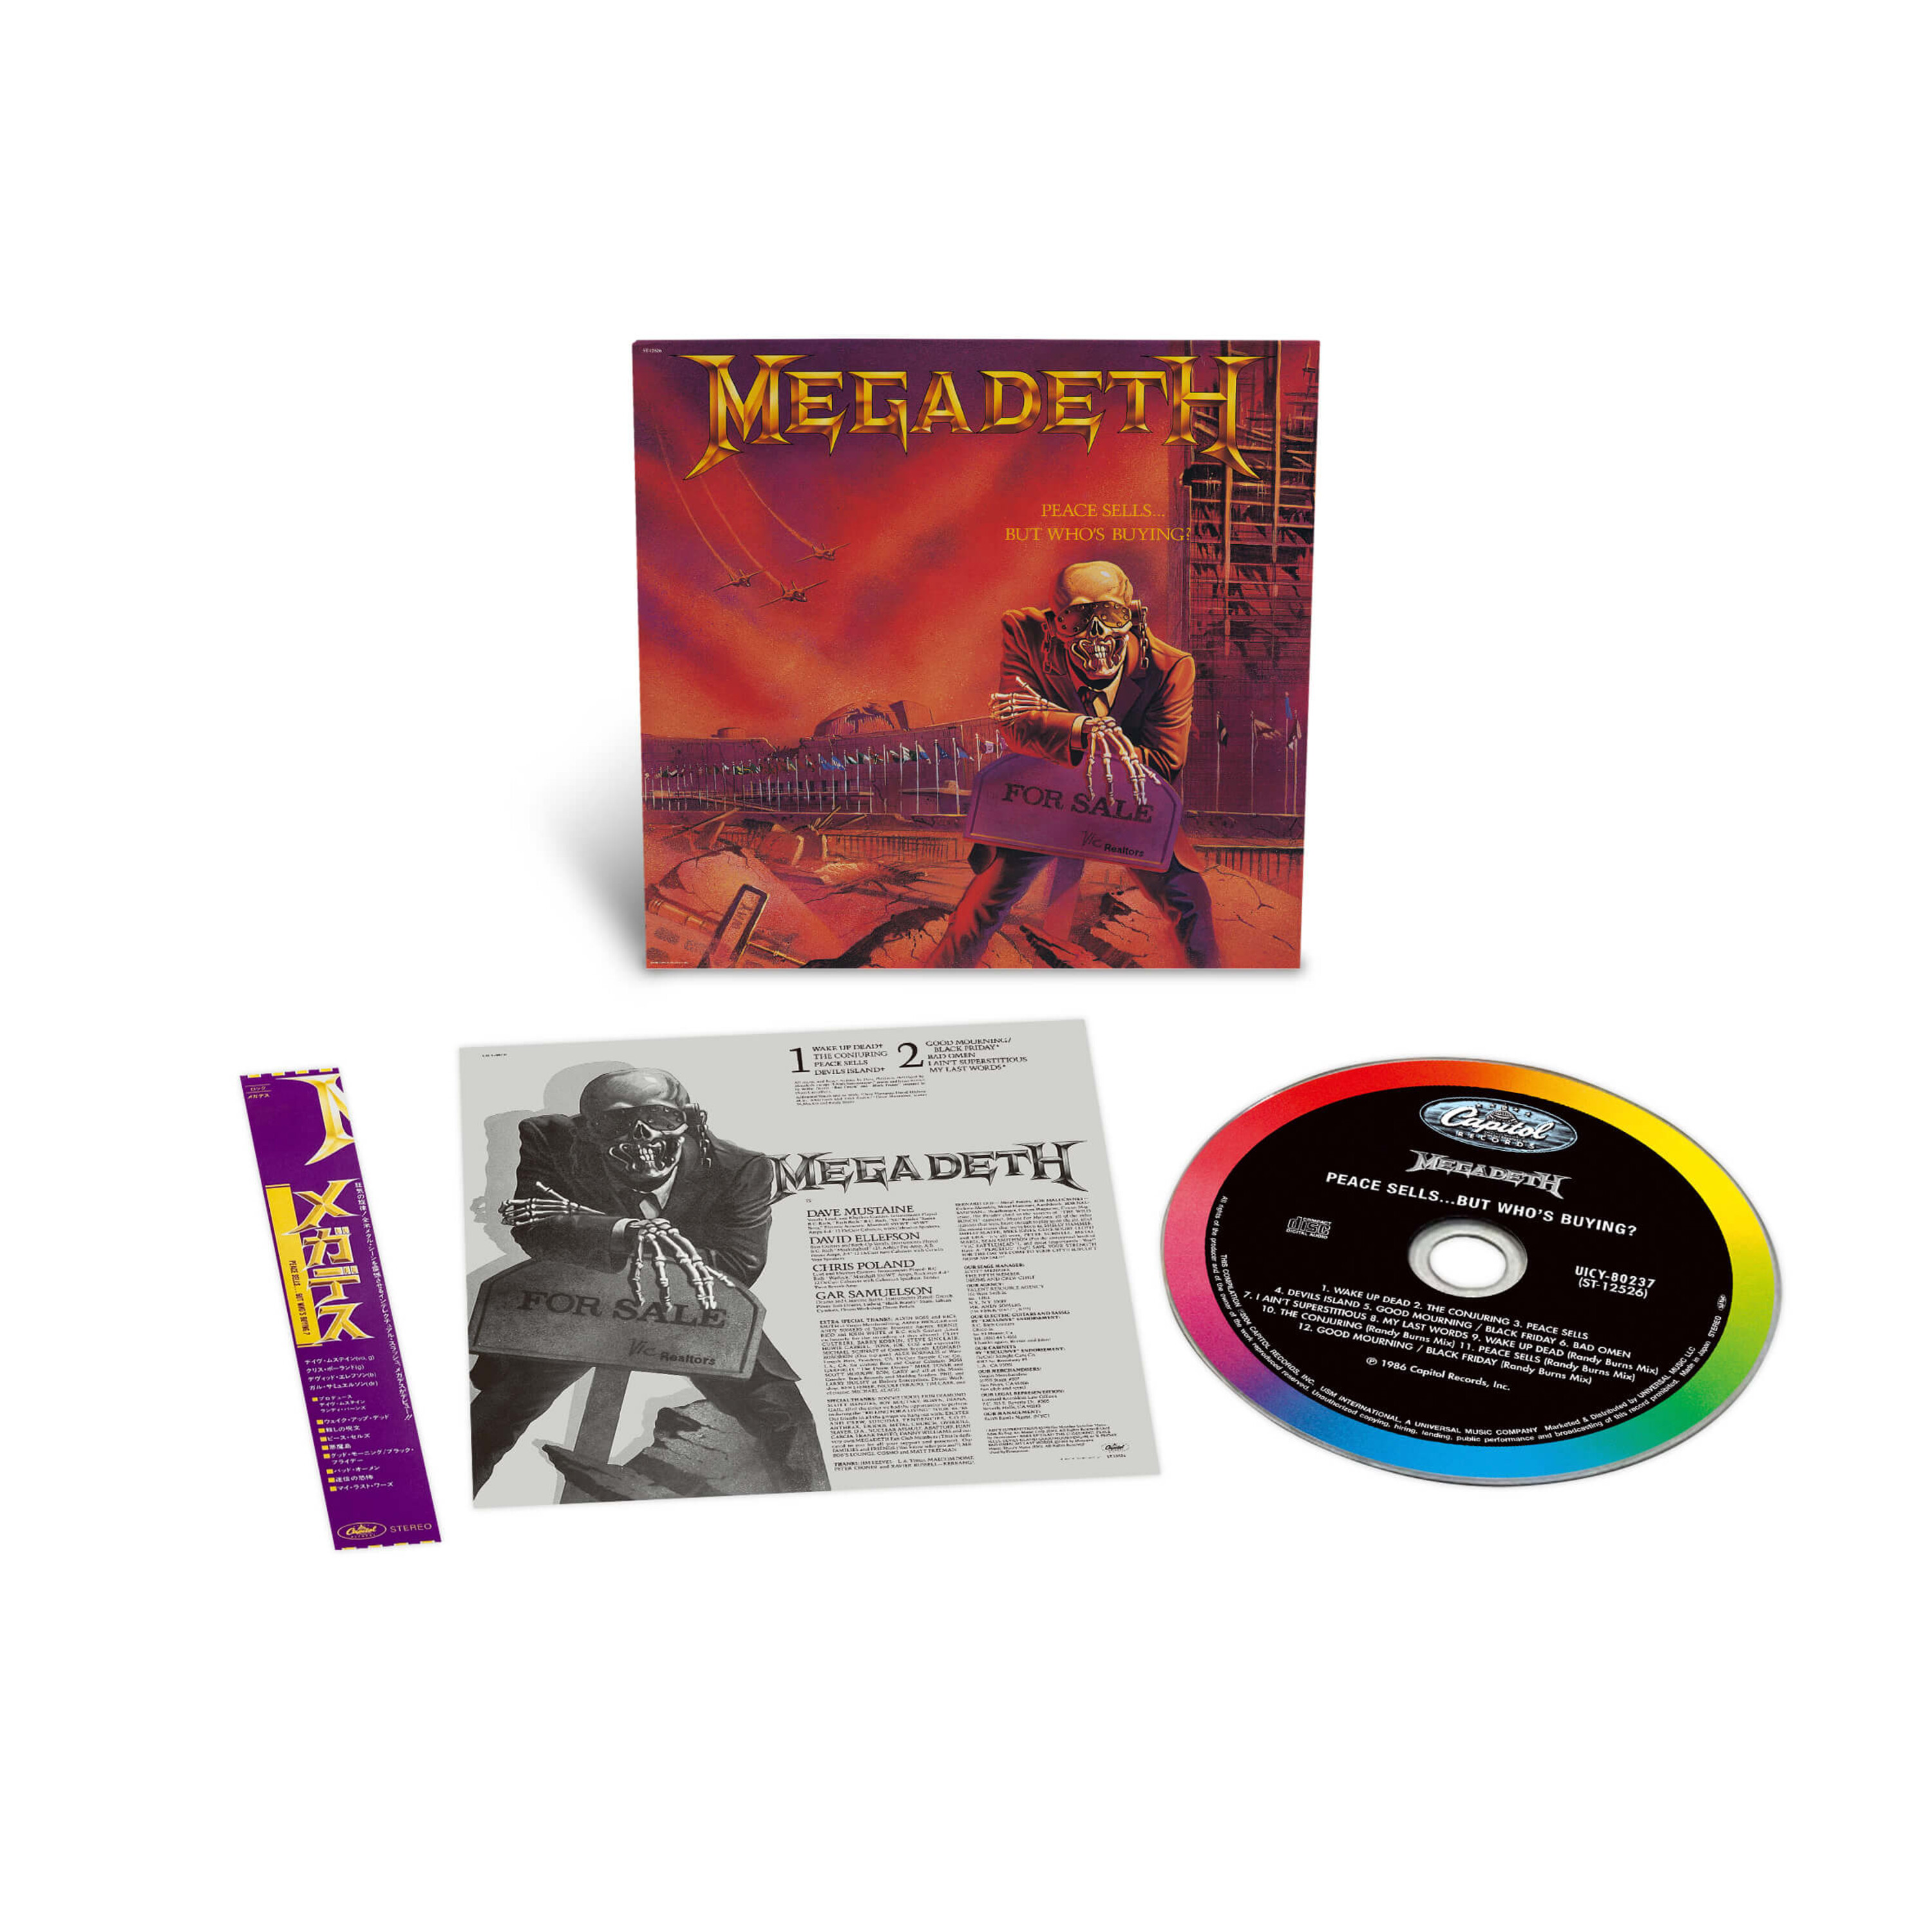 Peace　Official　Germany　Who's　SHM-CD　Sells...　But　Buying?　Japanese　Megadeth　Limited　uDiscover　Store